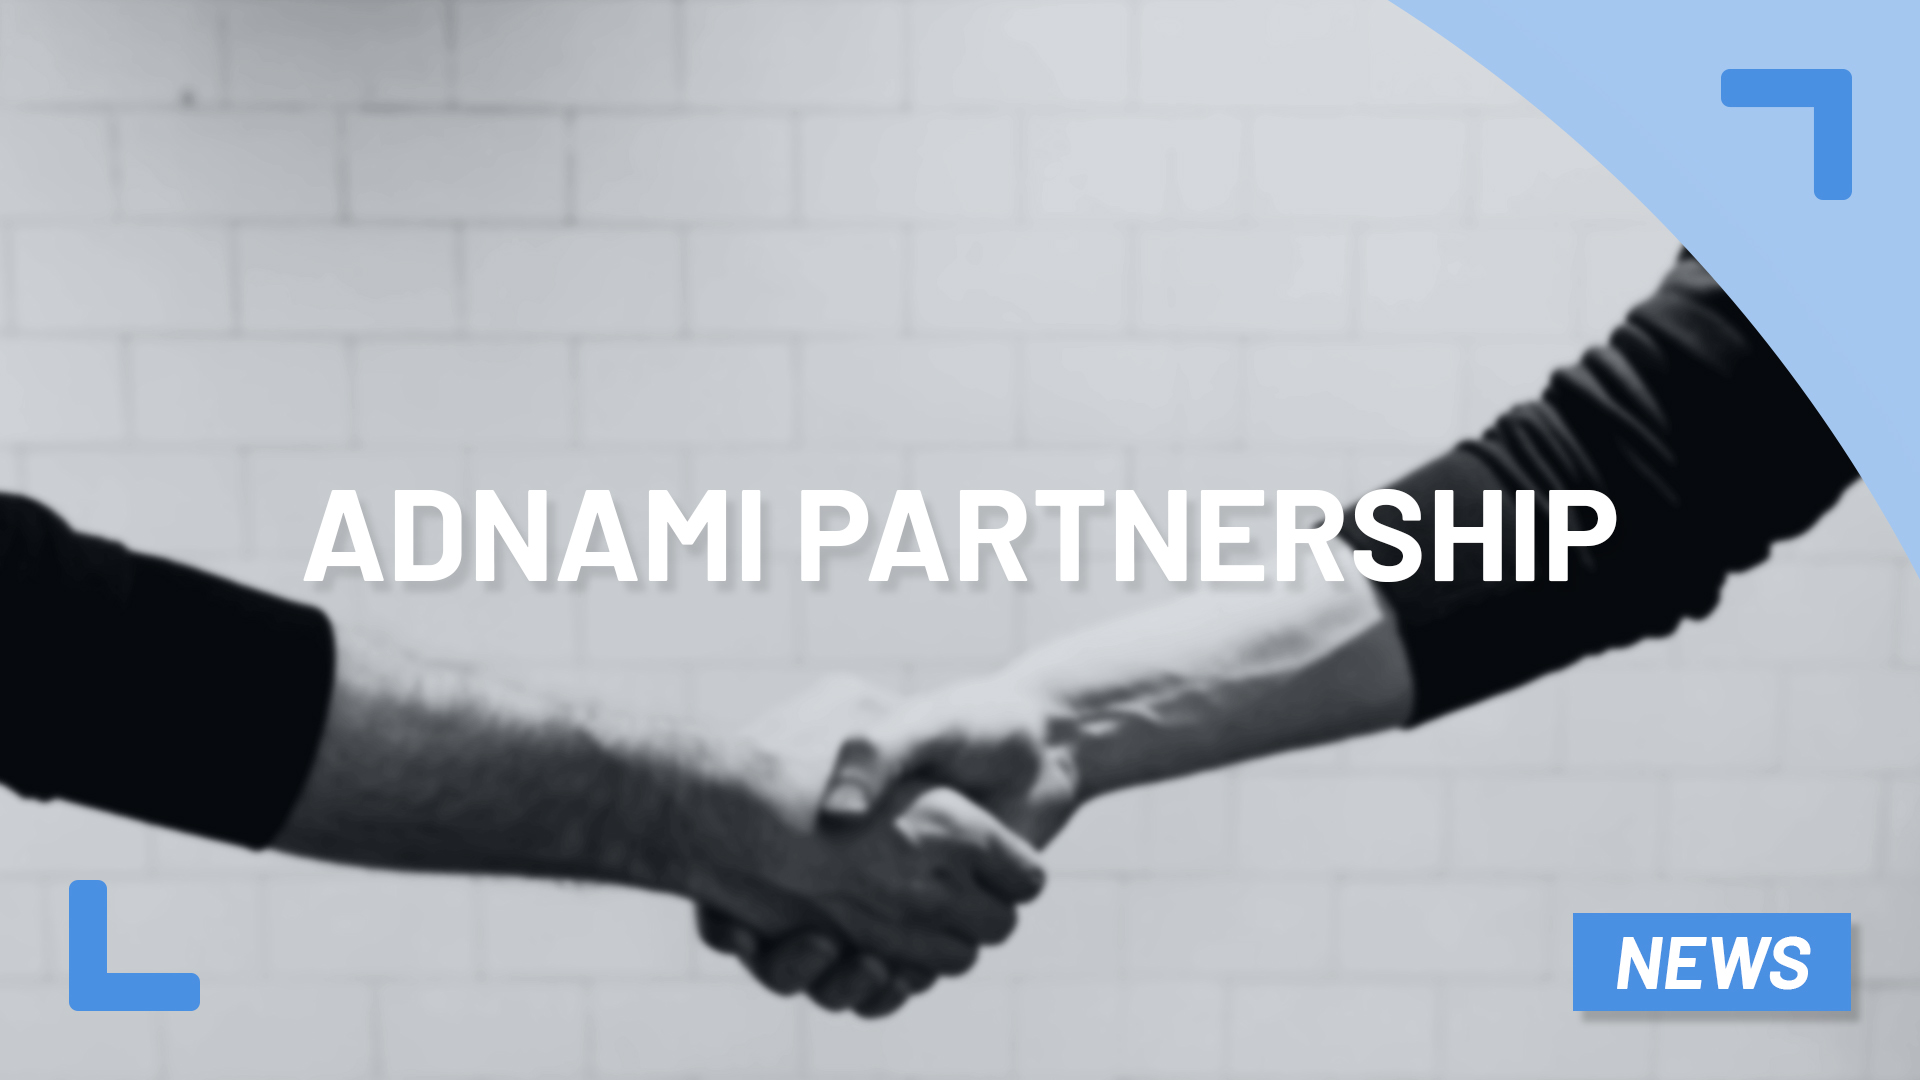 Strong partnership with Adnami - Zuuvi